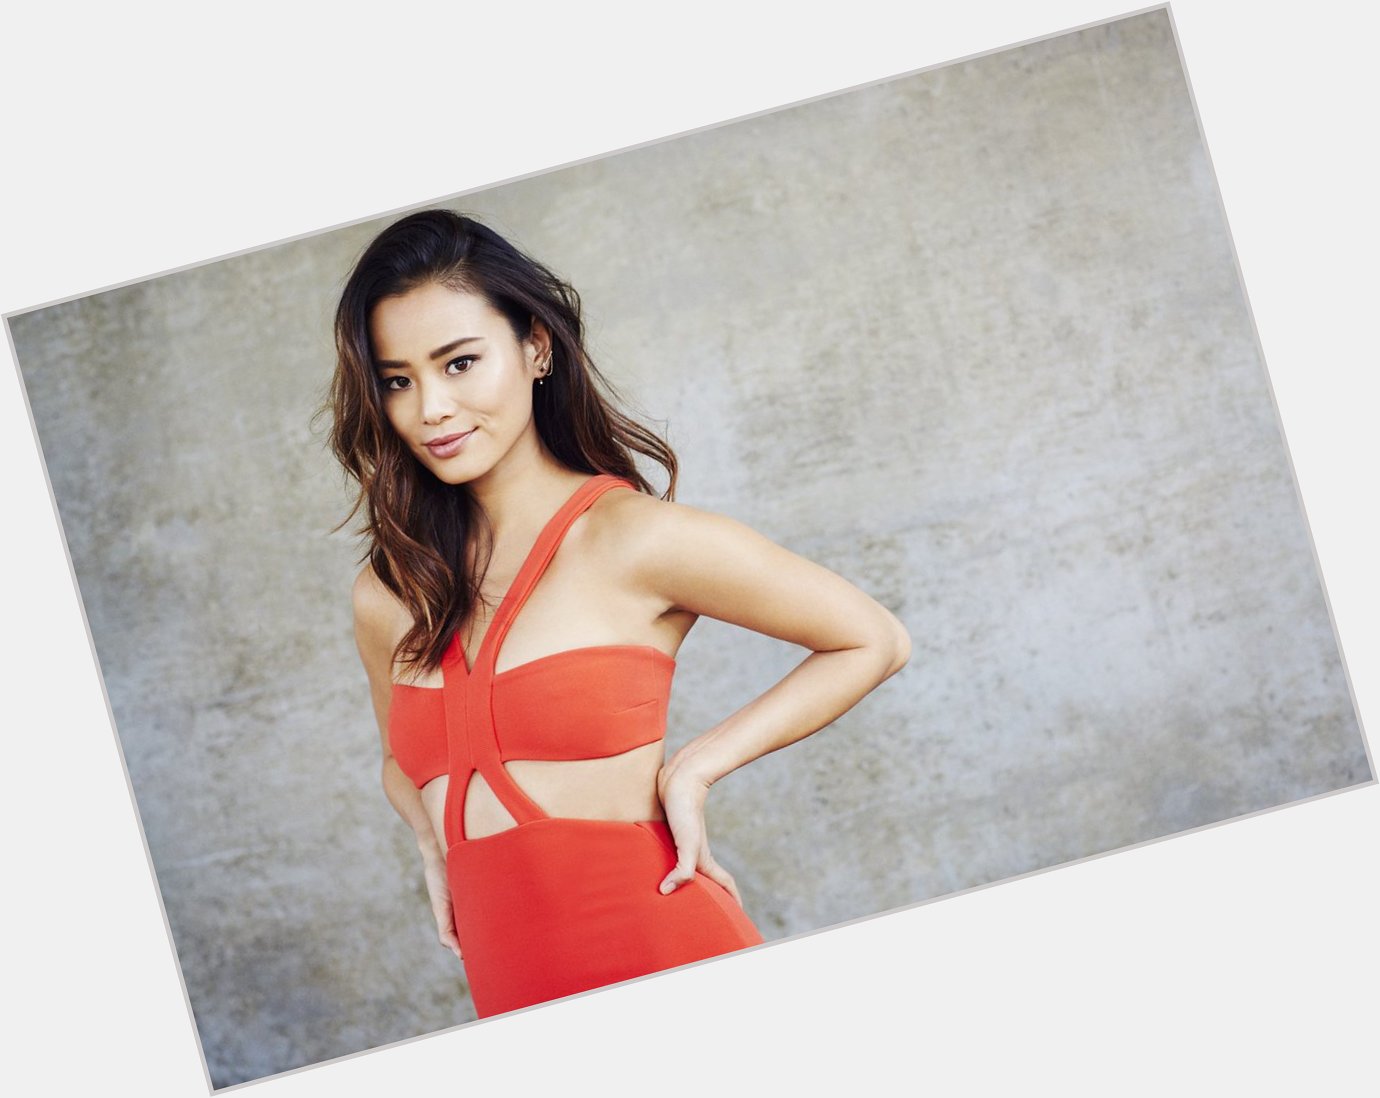 Celebrity Birthdays: This week, Actress and Model turned 35! \"HAPPY BIRTHDAY JAMIE CHUNG!\"      